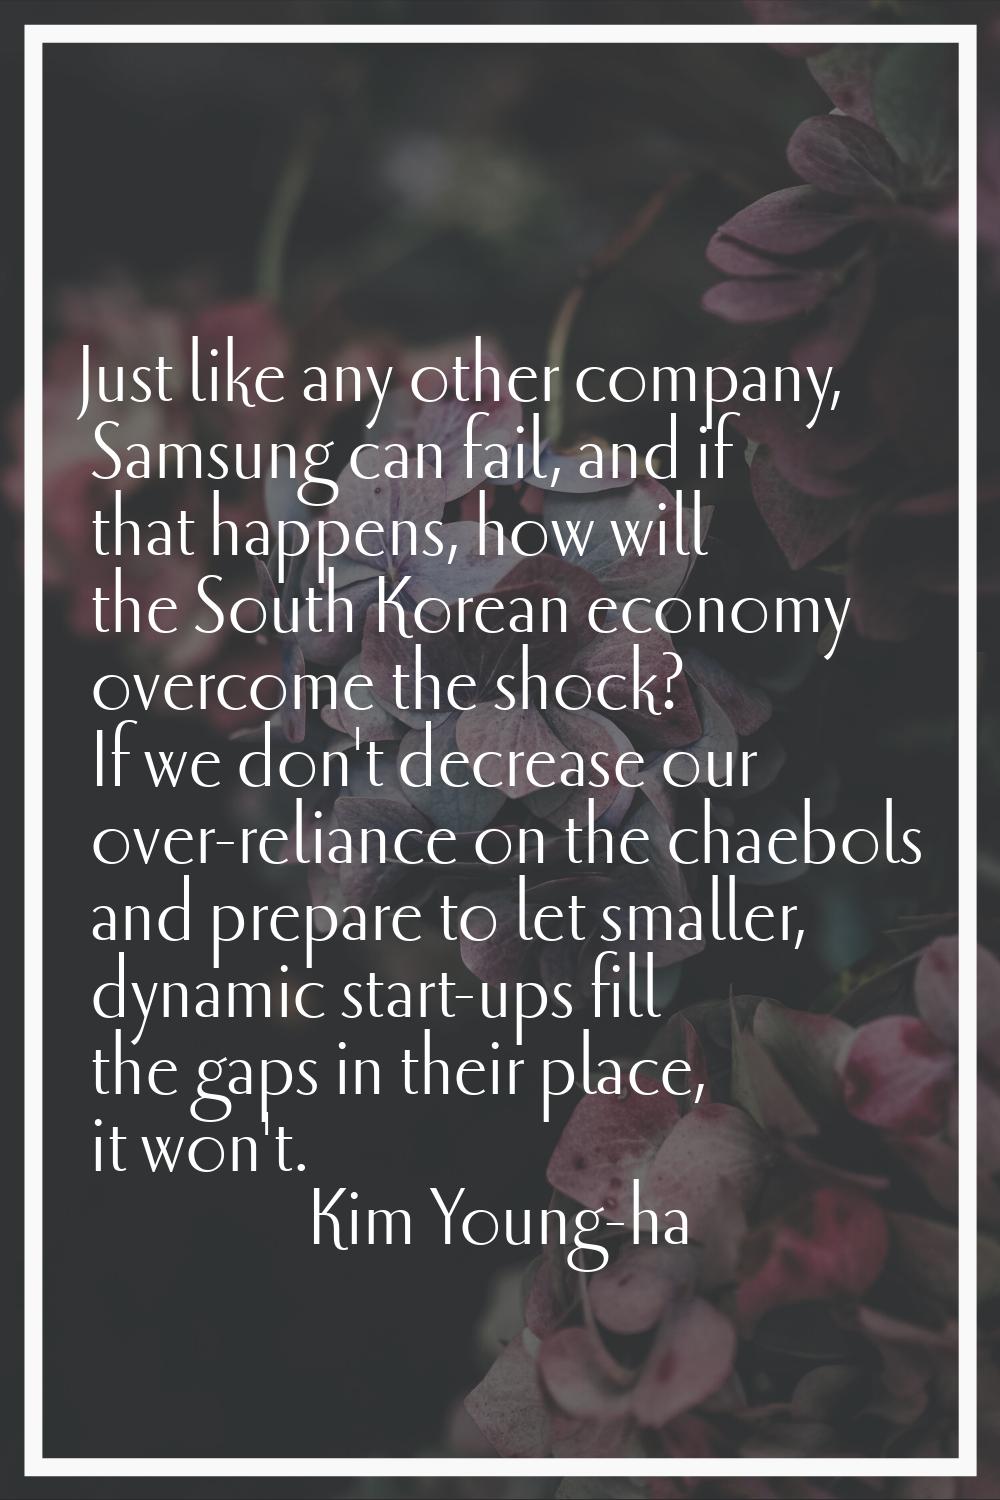 Just like any other company, Samsung can fail, and if that happens, how will the South Korean econo